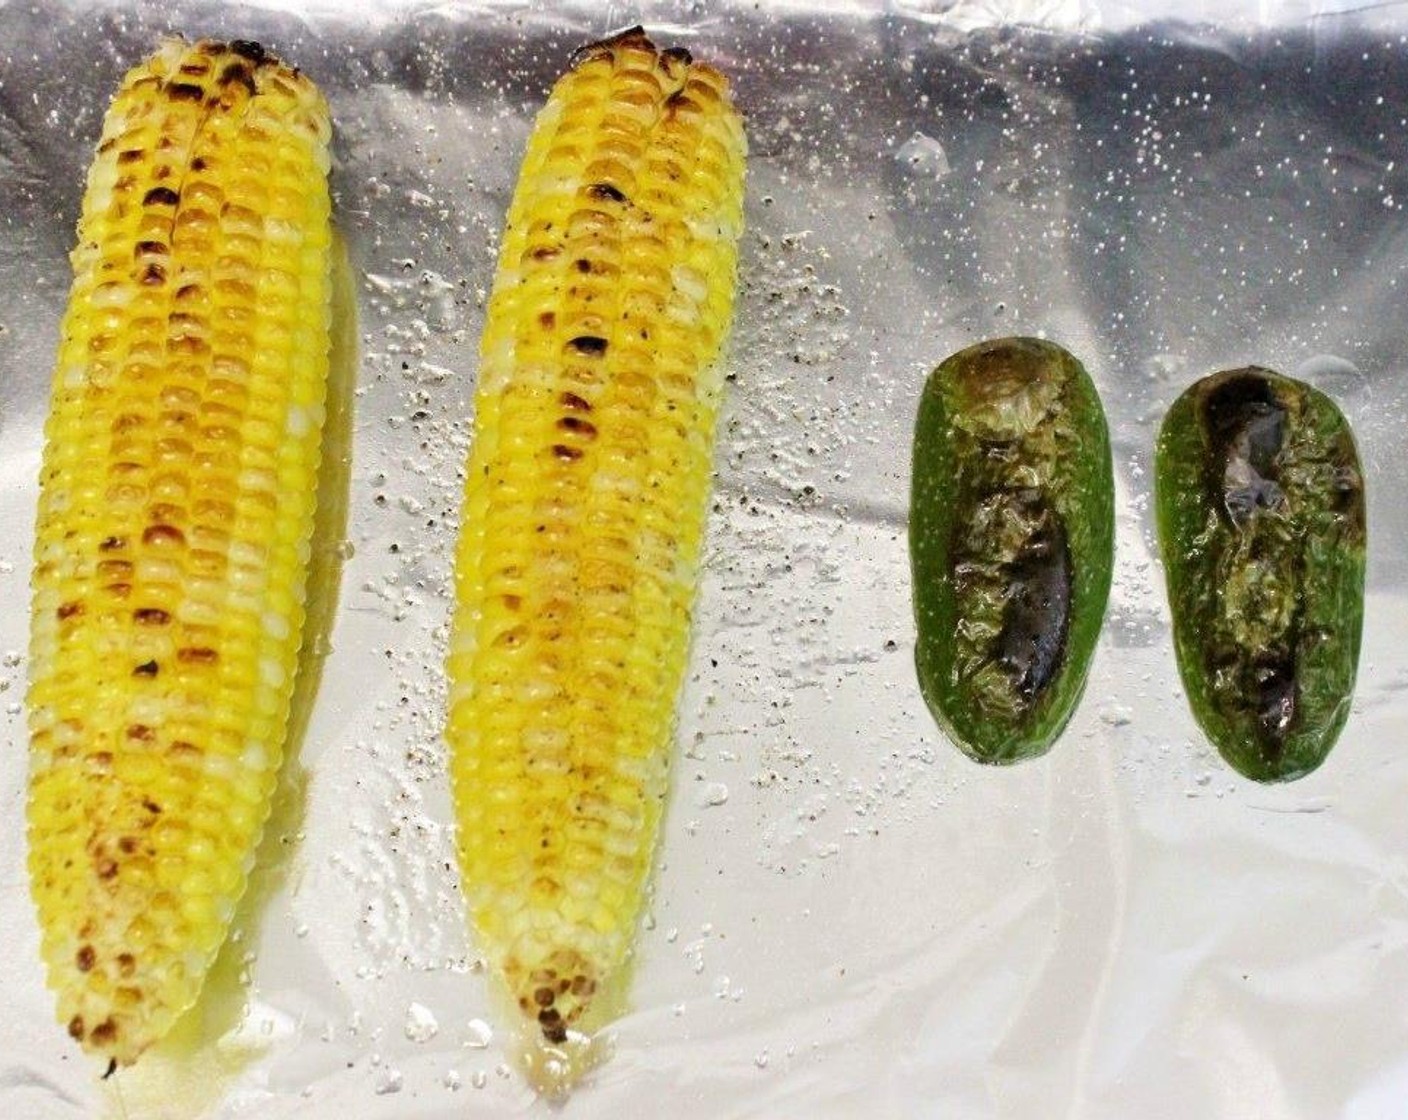 step 2 Broil for about 5-10 minutes, flipping the corn halfway through but not the jalapeno (broil the skin side only).